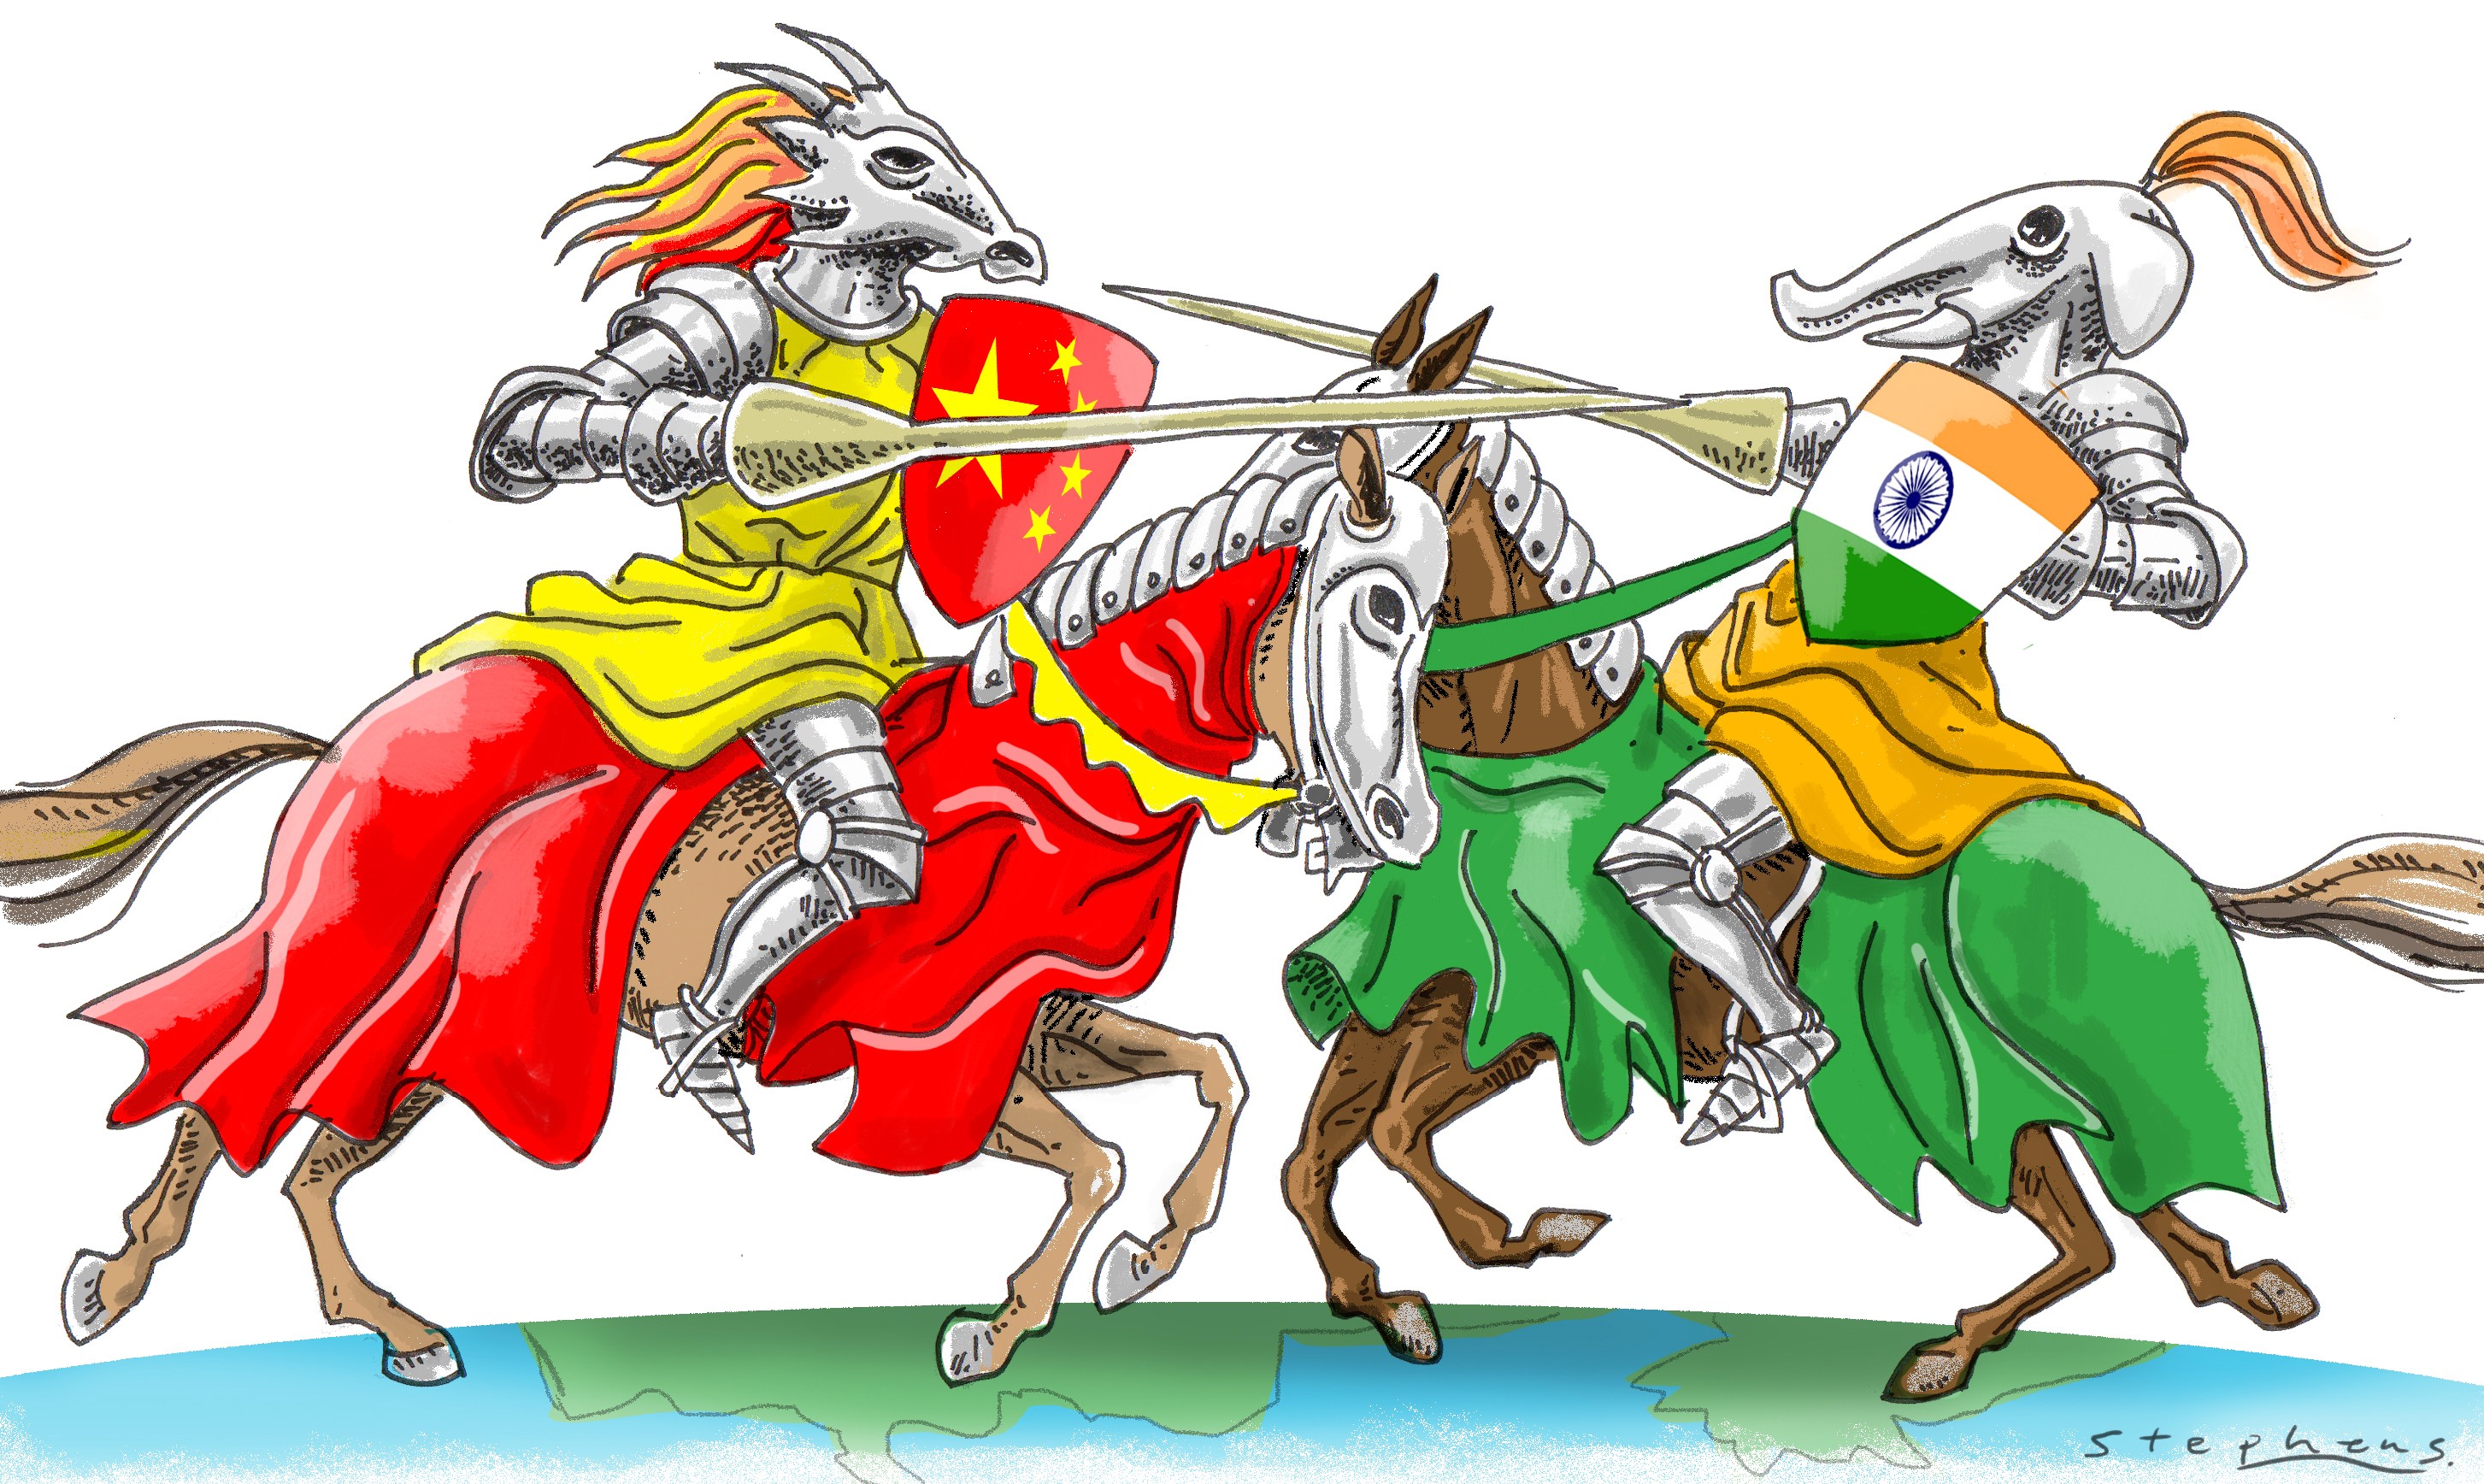 South Asia is fast emerging a theatre of Sino-Indian rivalry. Illustration: Craig Stephens